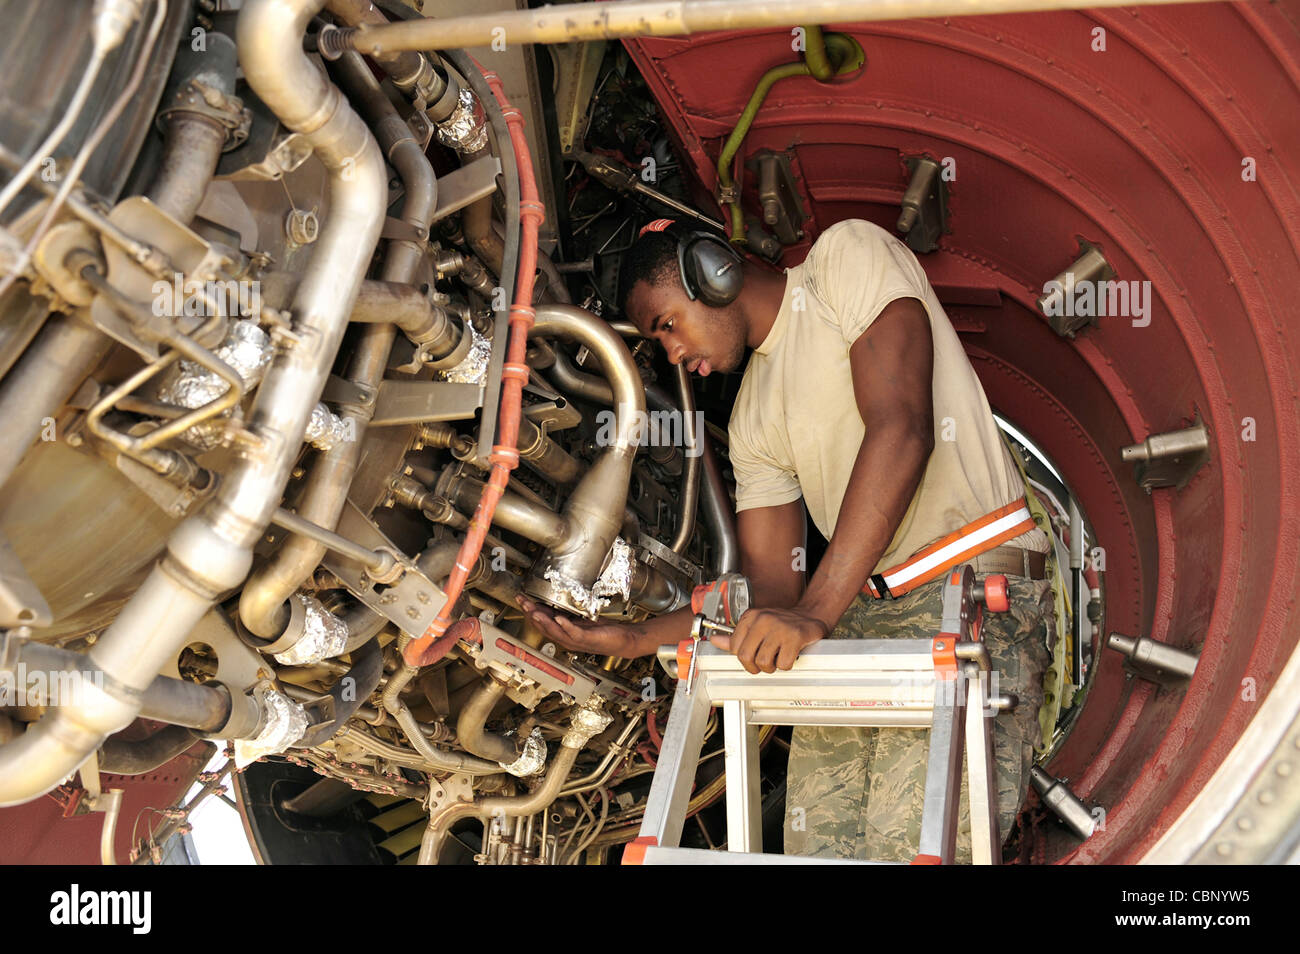 Airman 1st Class Mareguis Killebrew checks for leaks on a KC-10 Extender engine Aug. 29, 2009, at an air base in Southwest Asia. Airman Killebrew is assigned to the 380th Expeditionary Maintenance Squadron, and is deployed from Travis Air Force Base, Calif. Stock Photo